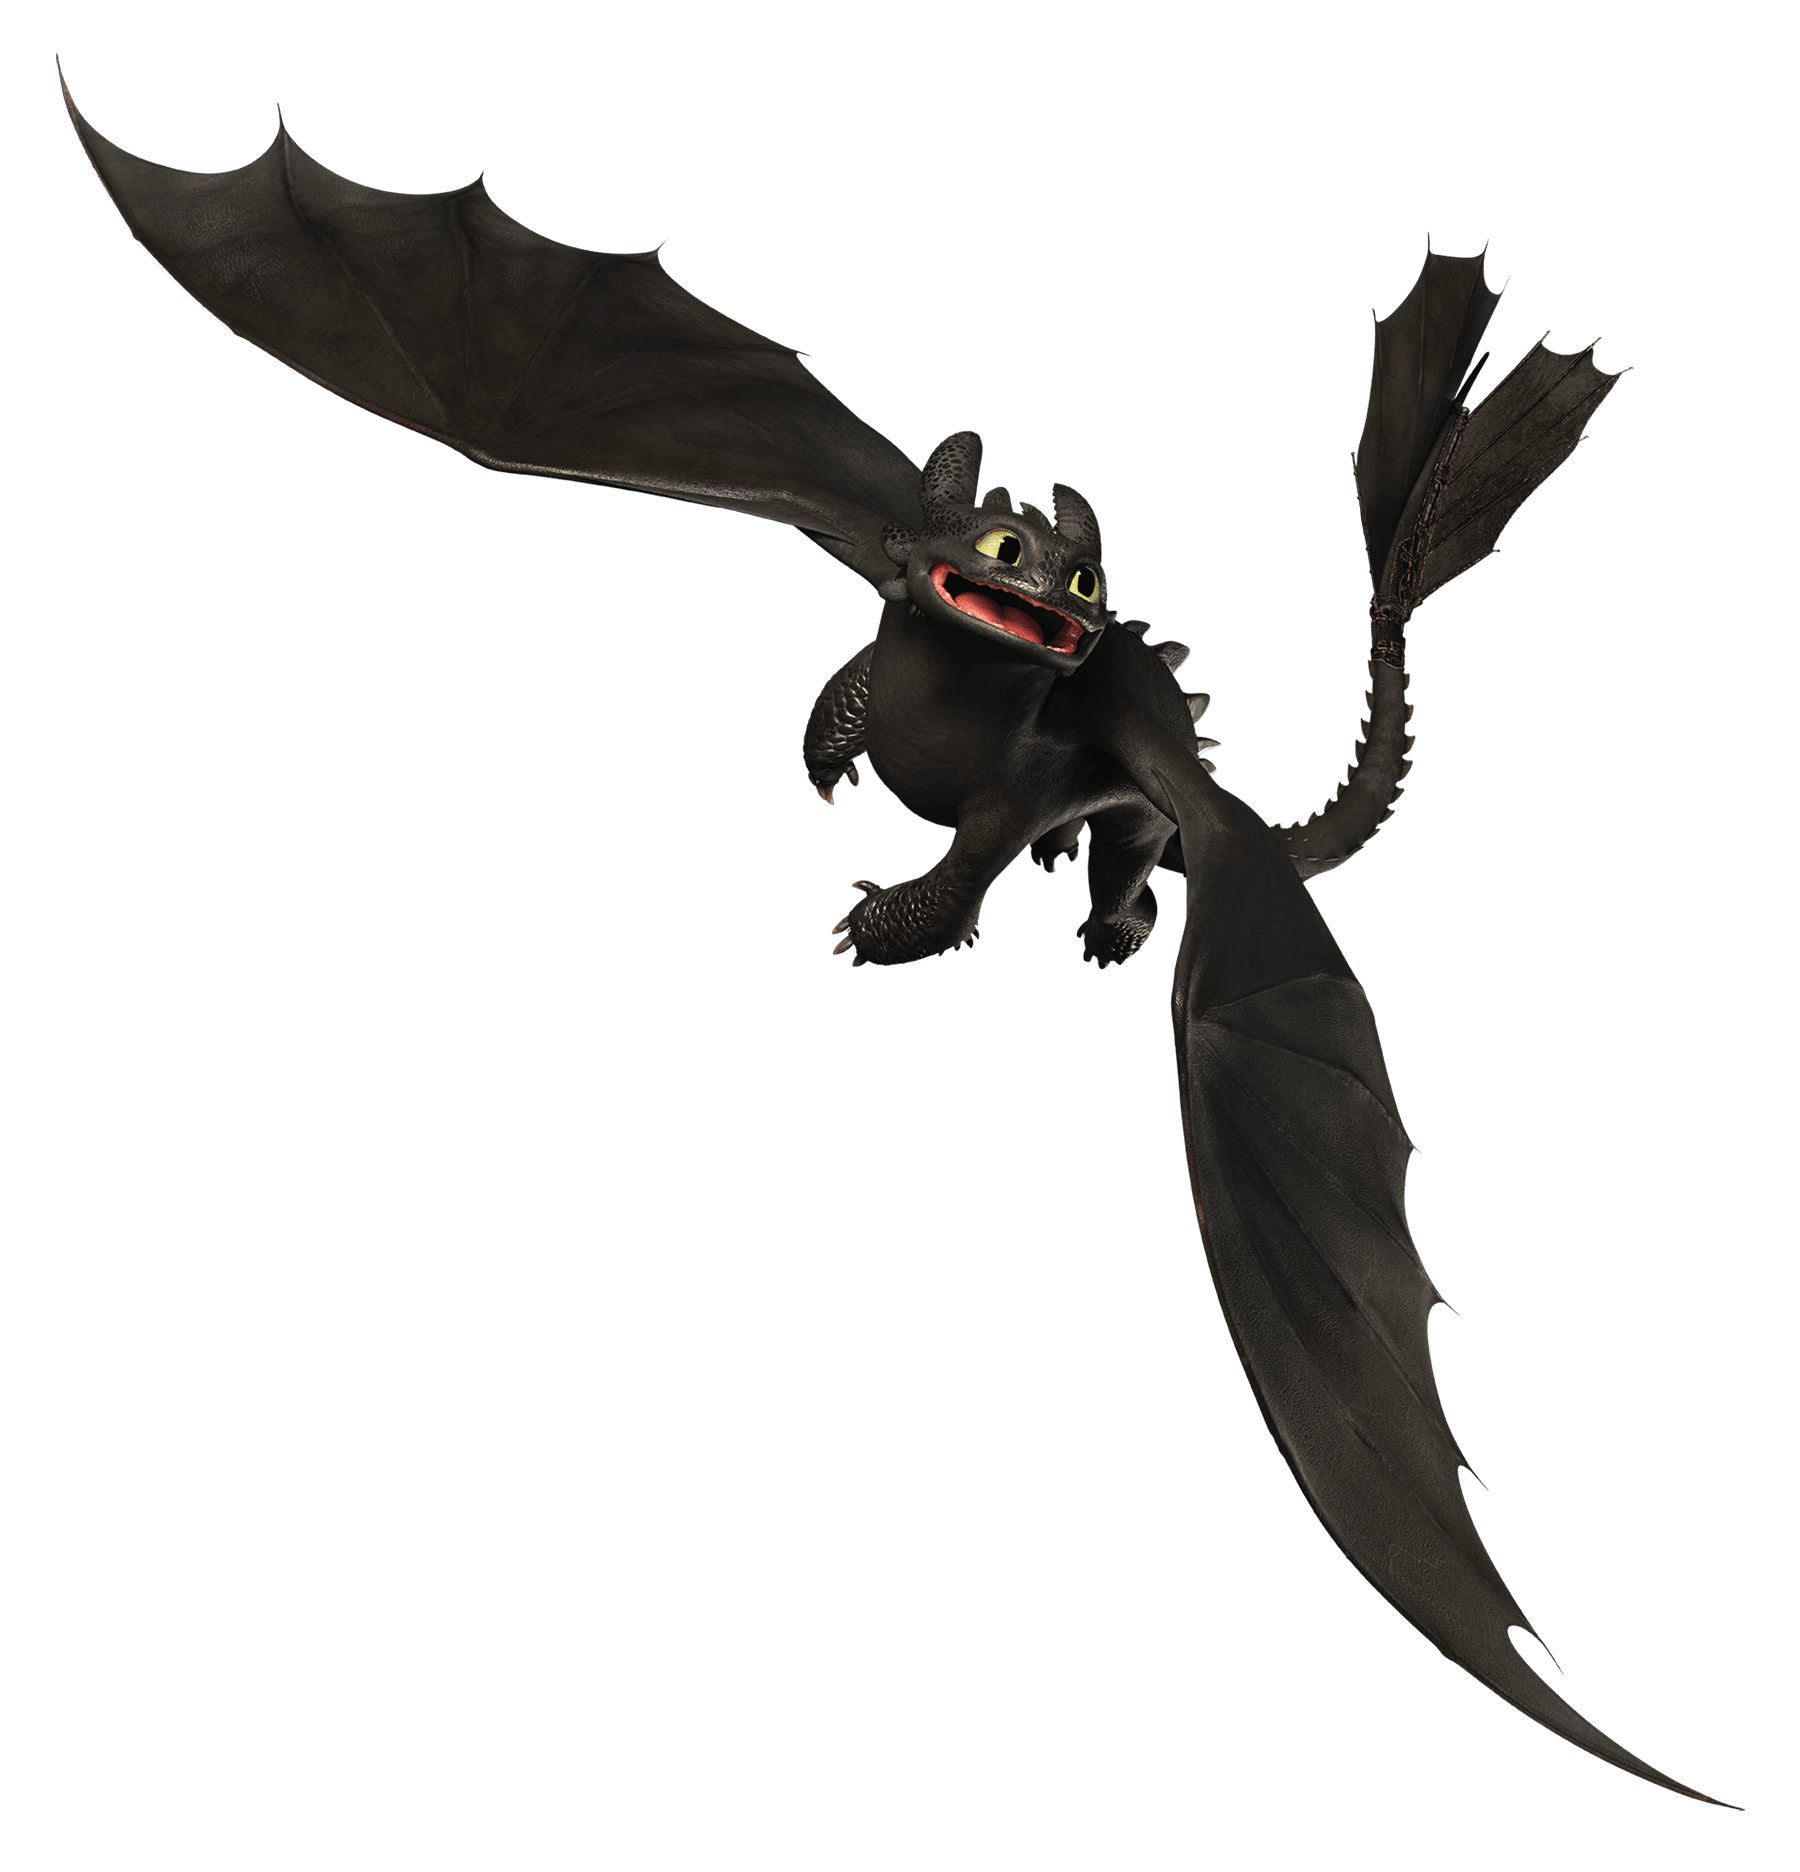 Toothless | How to Train Your Dragon Wiki | Fandom